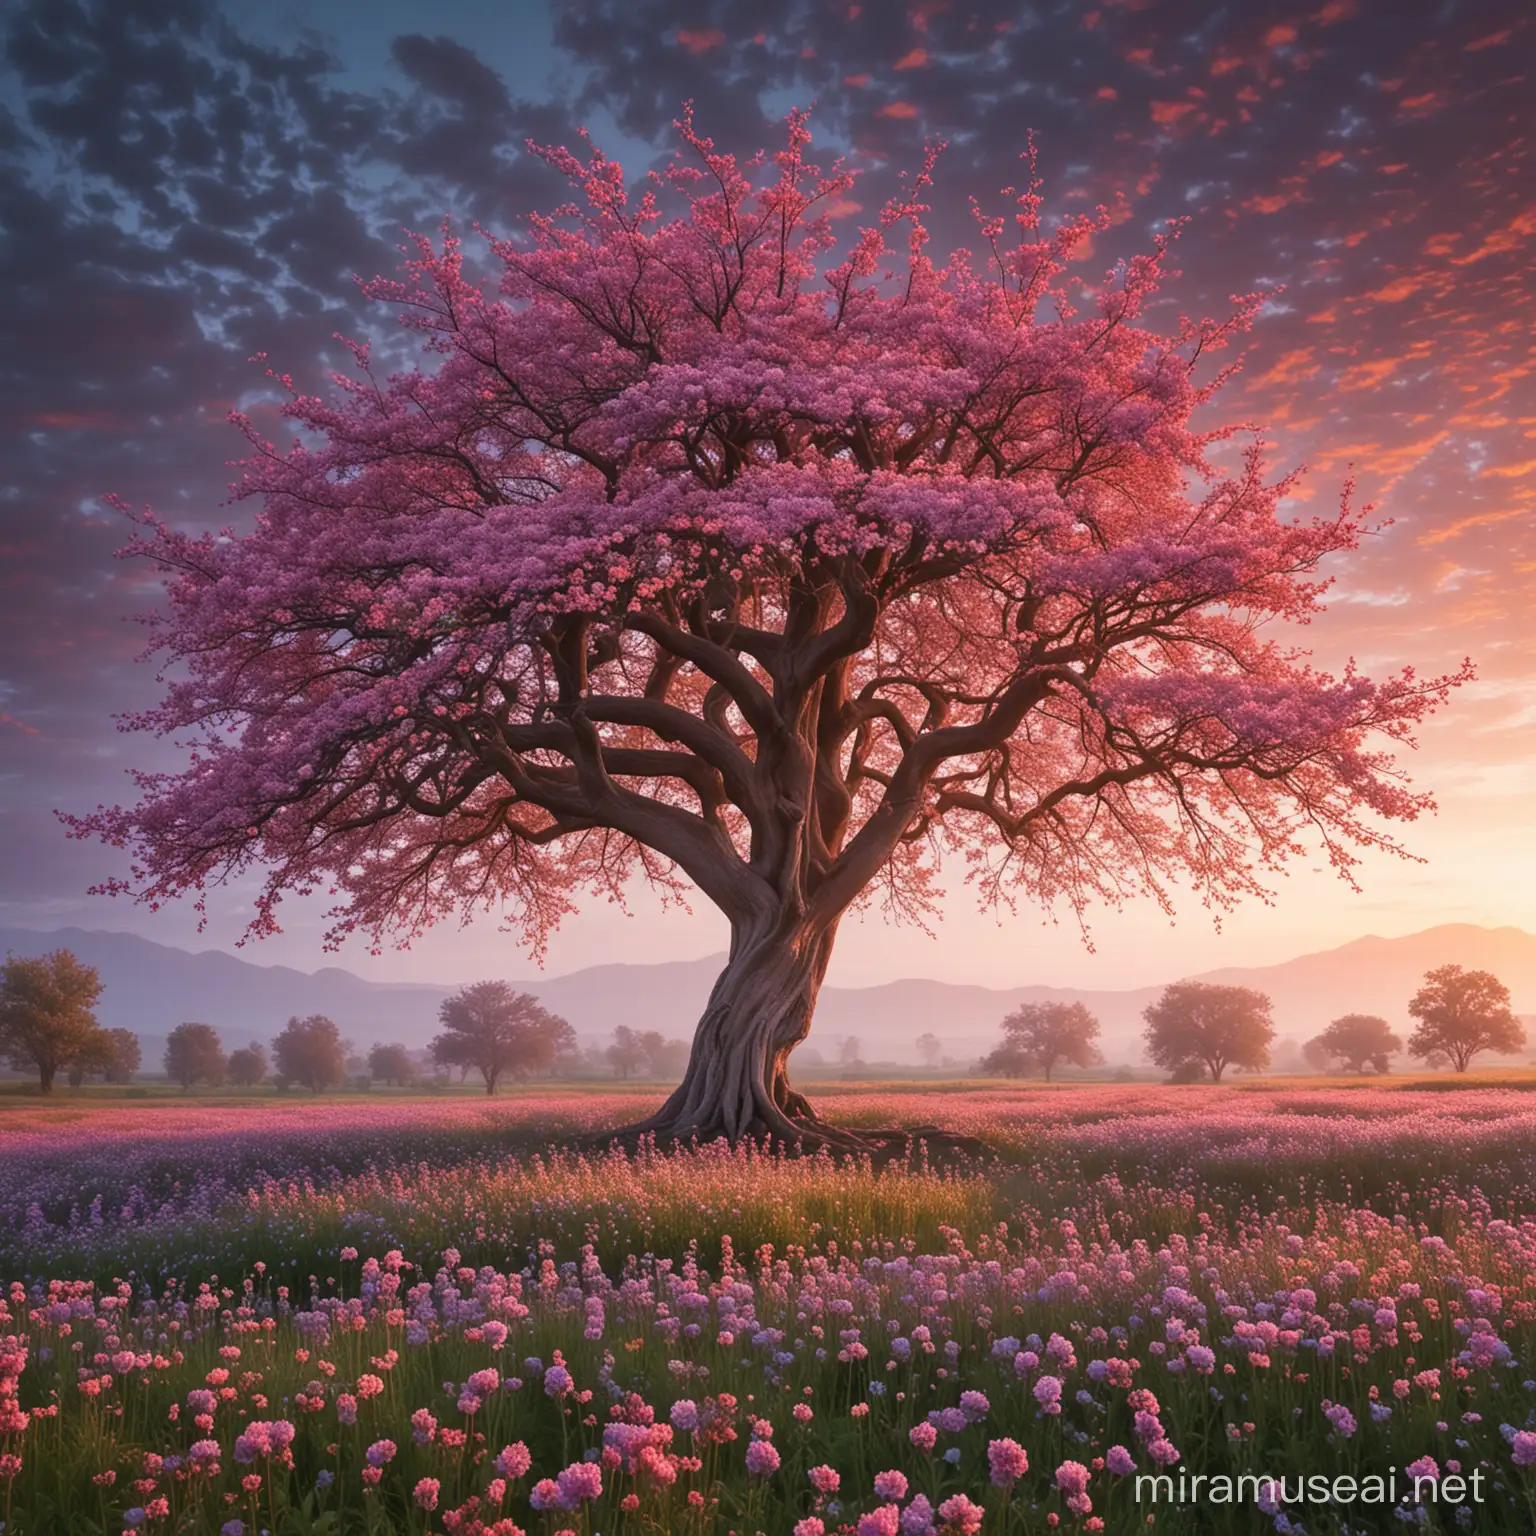 An ethereal tree surrounded by a field of glowing flowers 